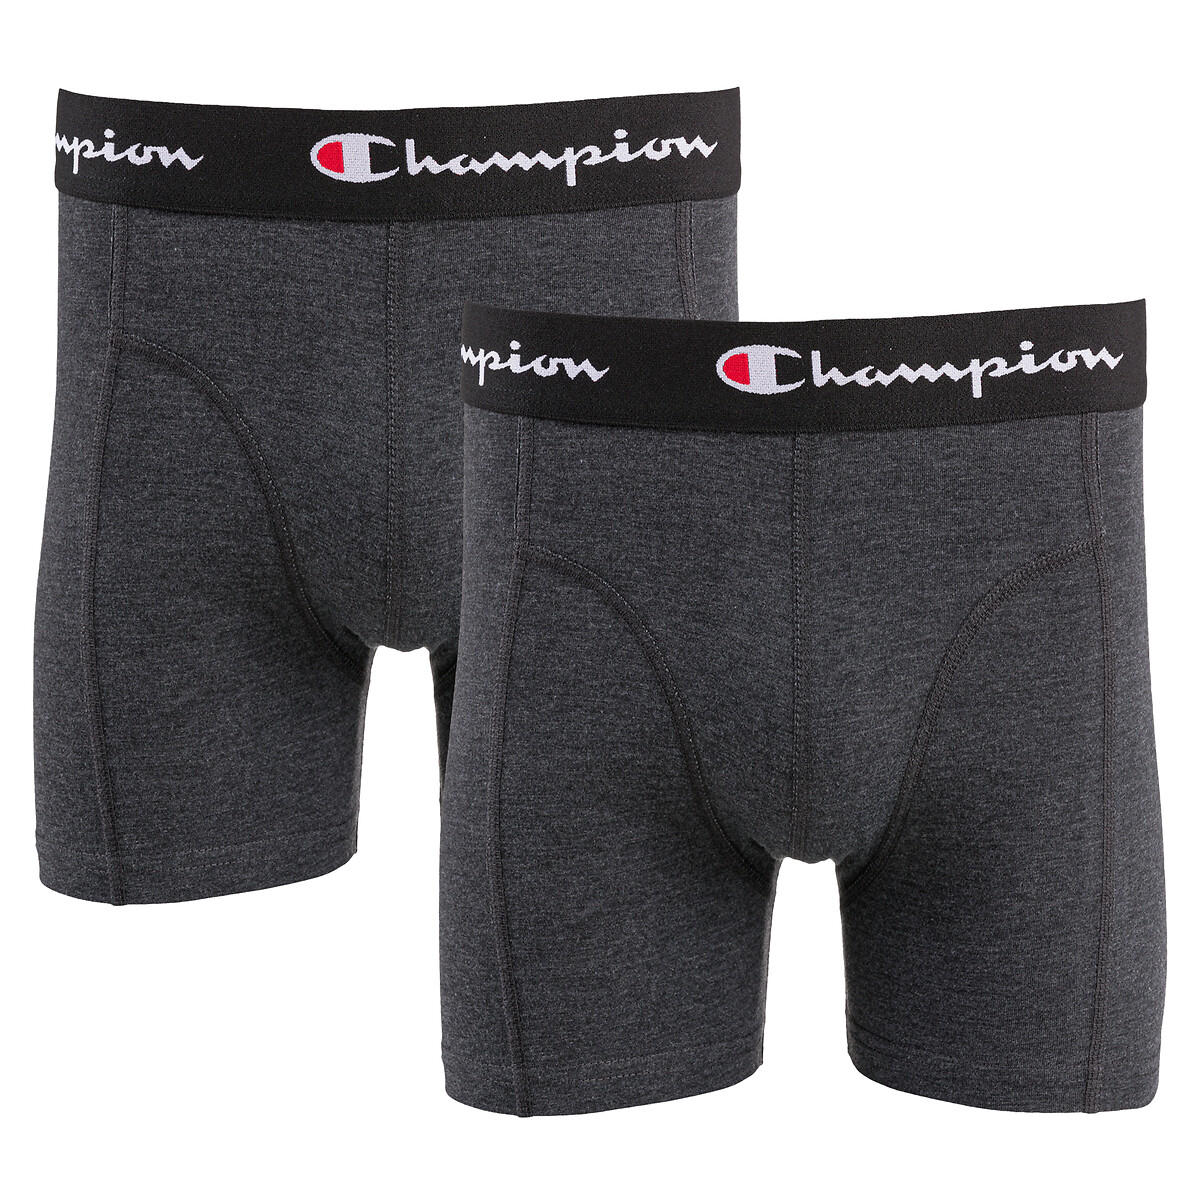 Pack of 2 basic plain hipsters in cotton Champion